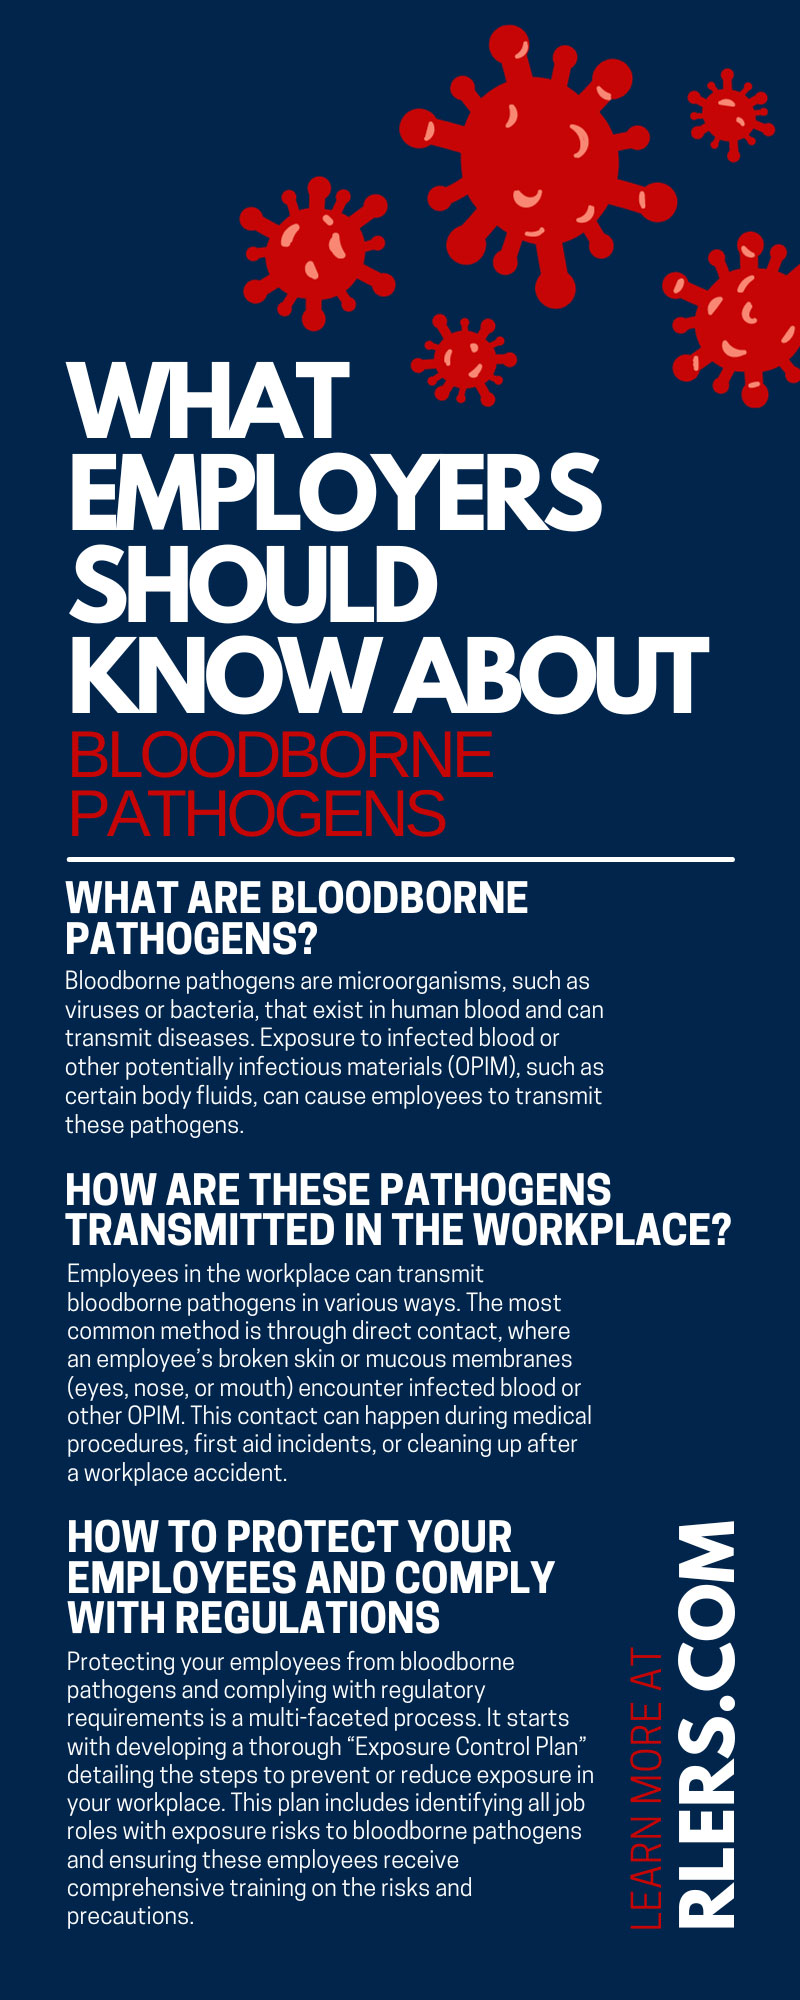 What Employers Should Know About Bloodborne Pathogens